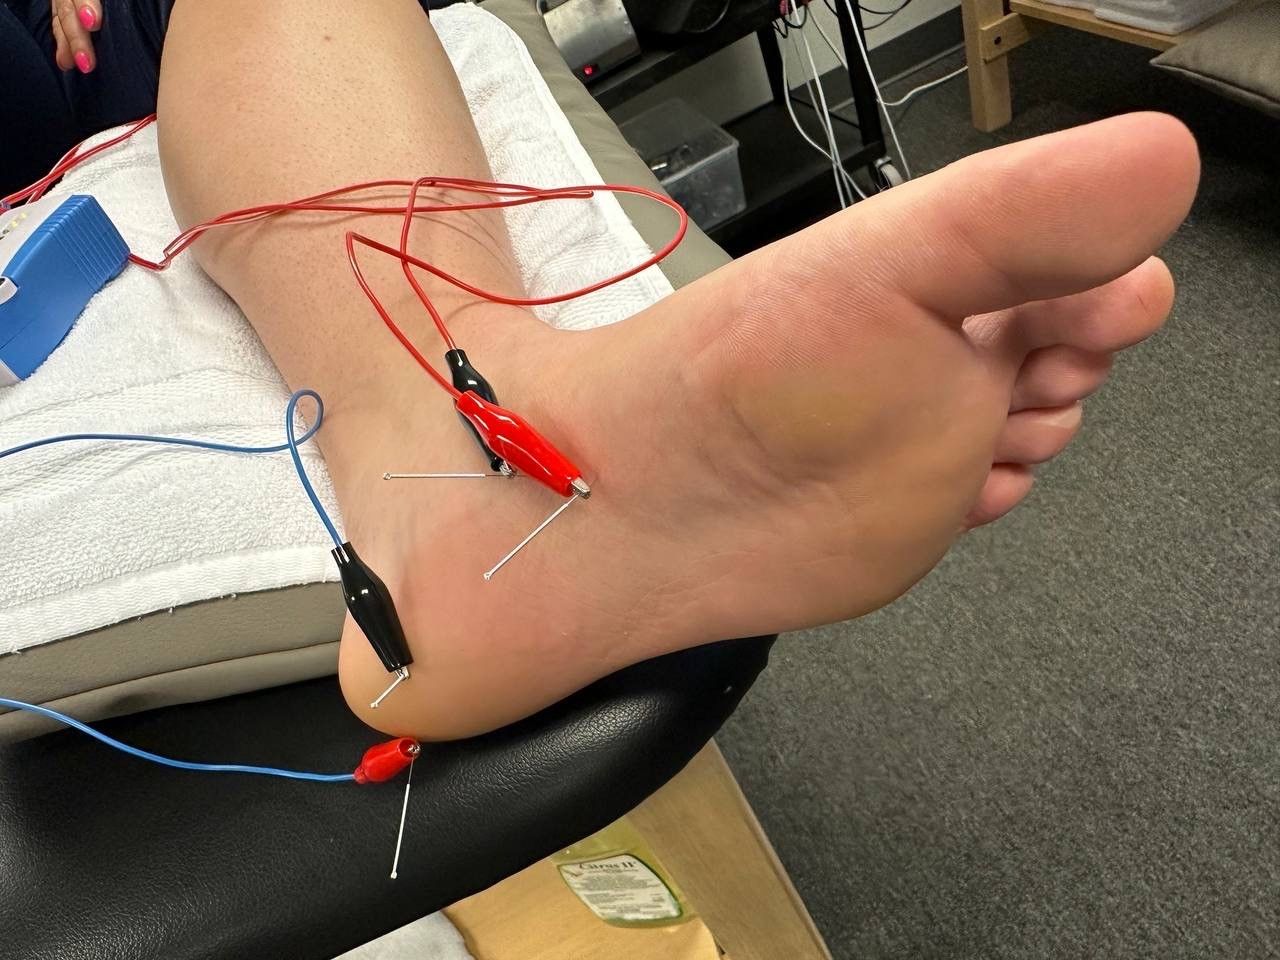 What Is Dry Needling?